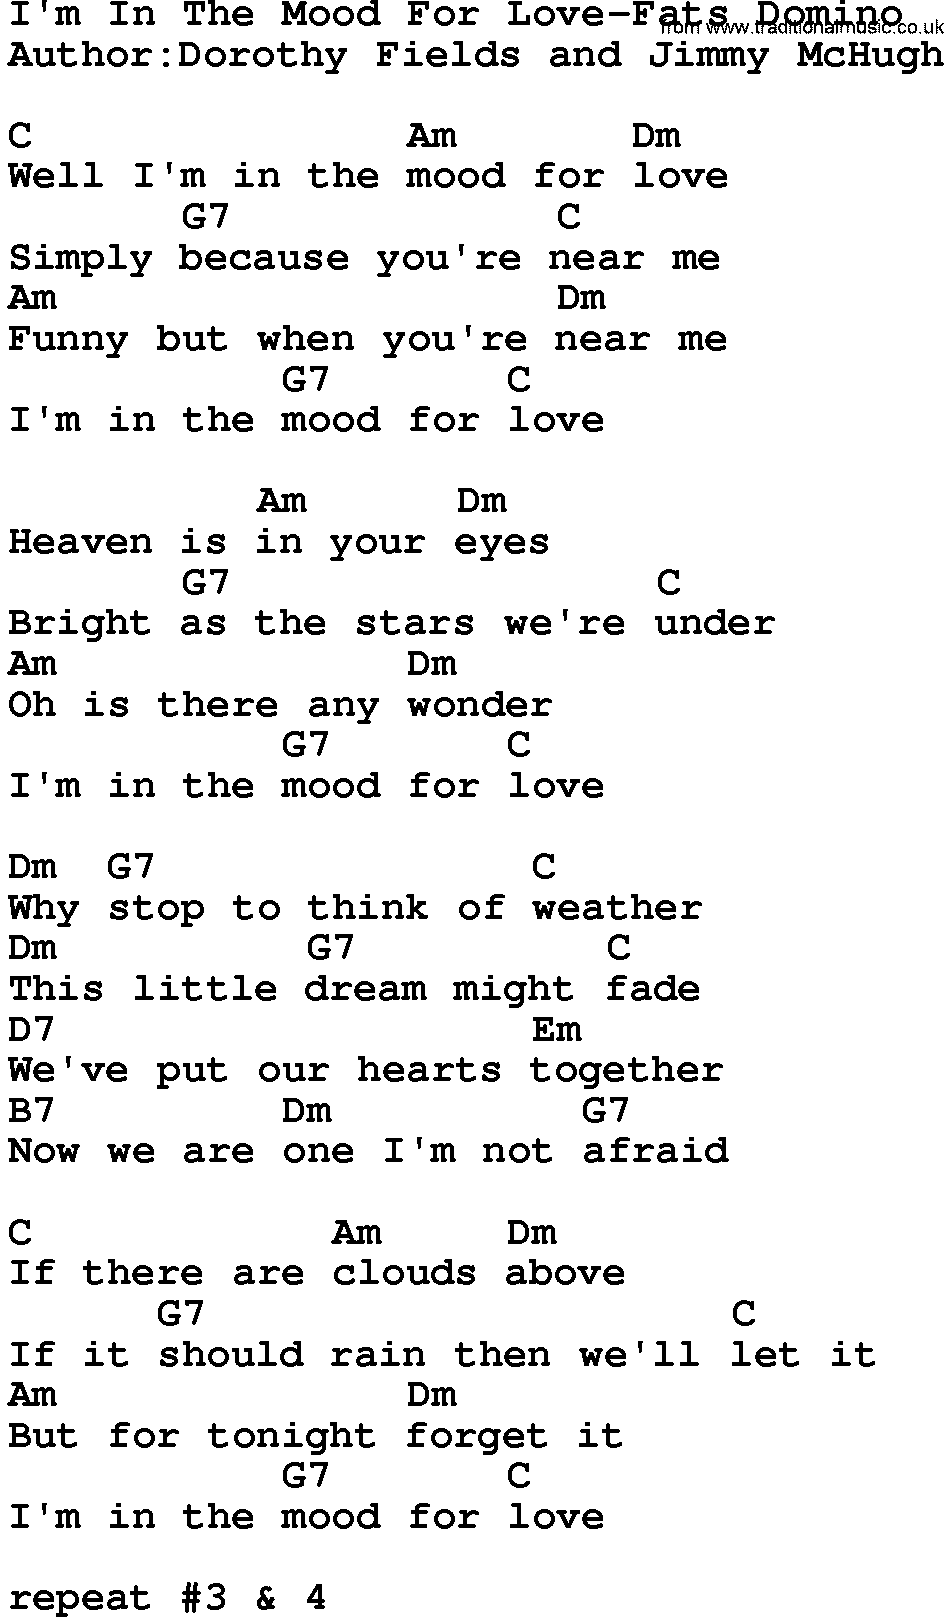 Country music song: I'm In The Mood For Love-Fats Domino lyrics and chords